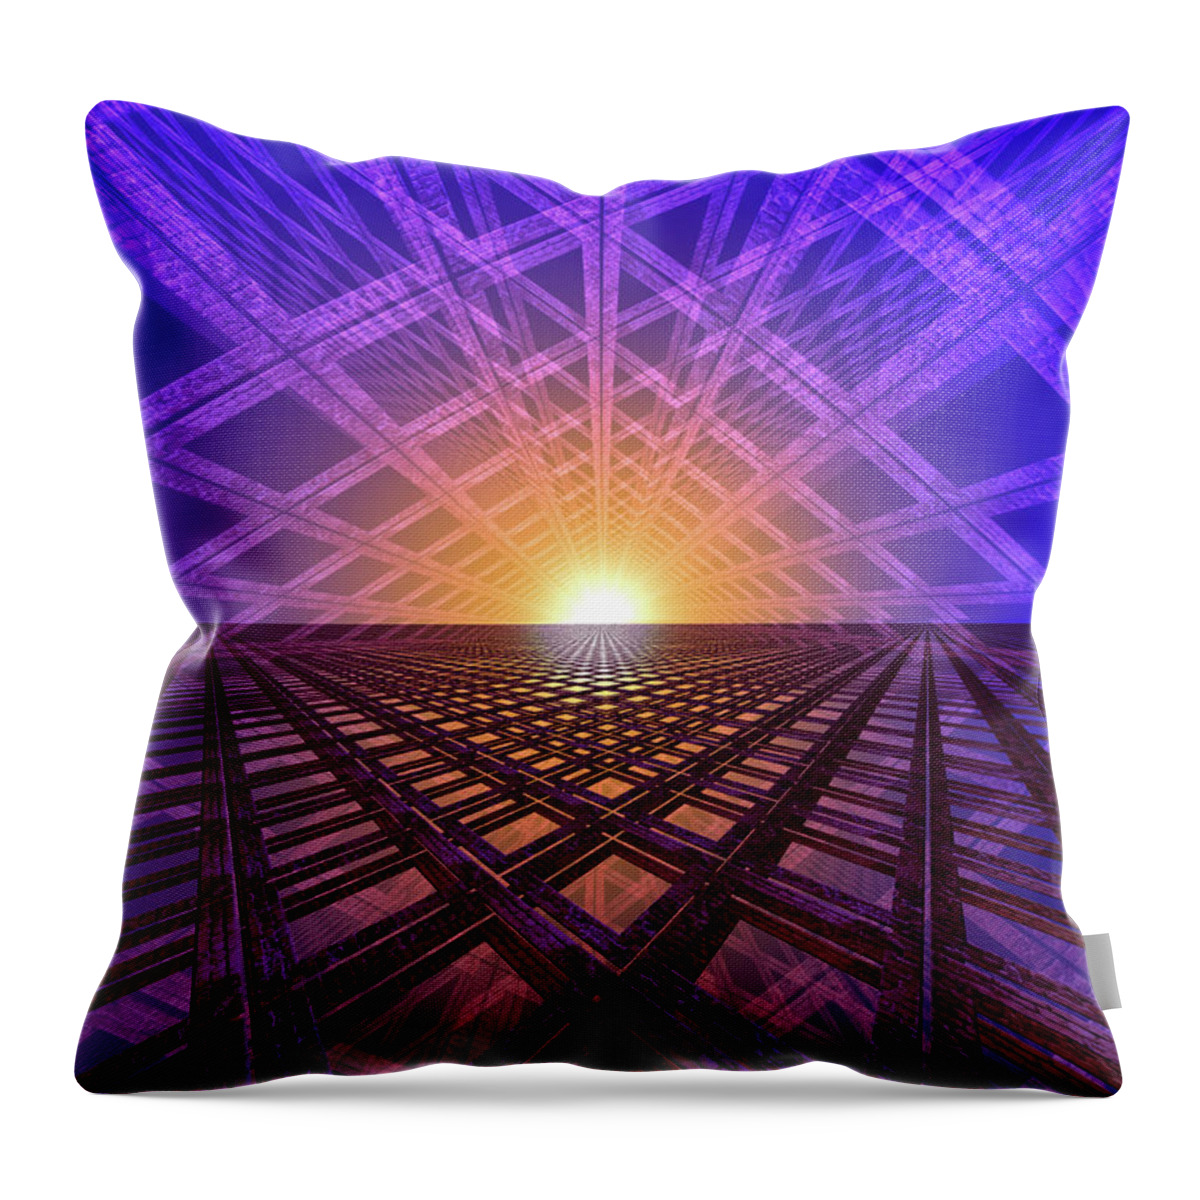 Star Gate Throw Pillow featuring the digital art Path to the Stars by Phil Perkins